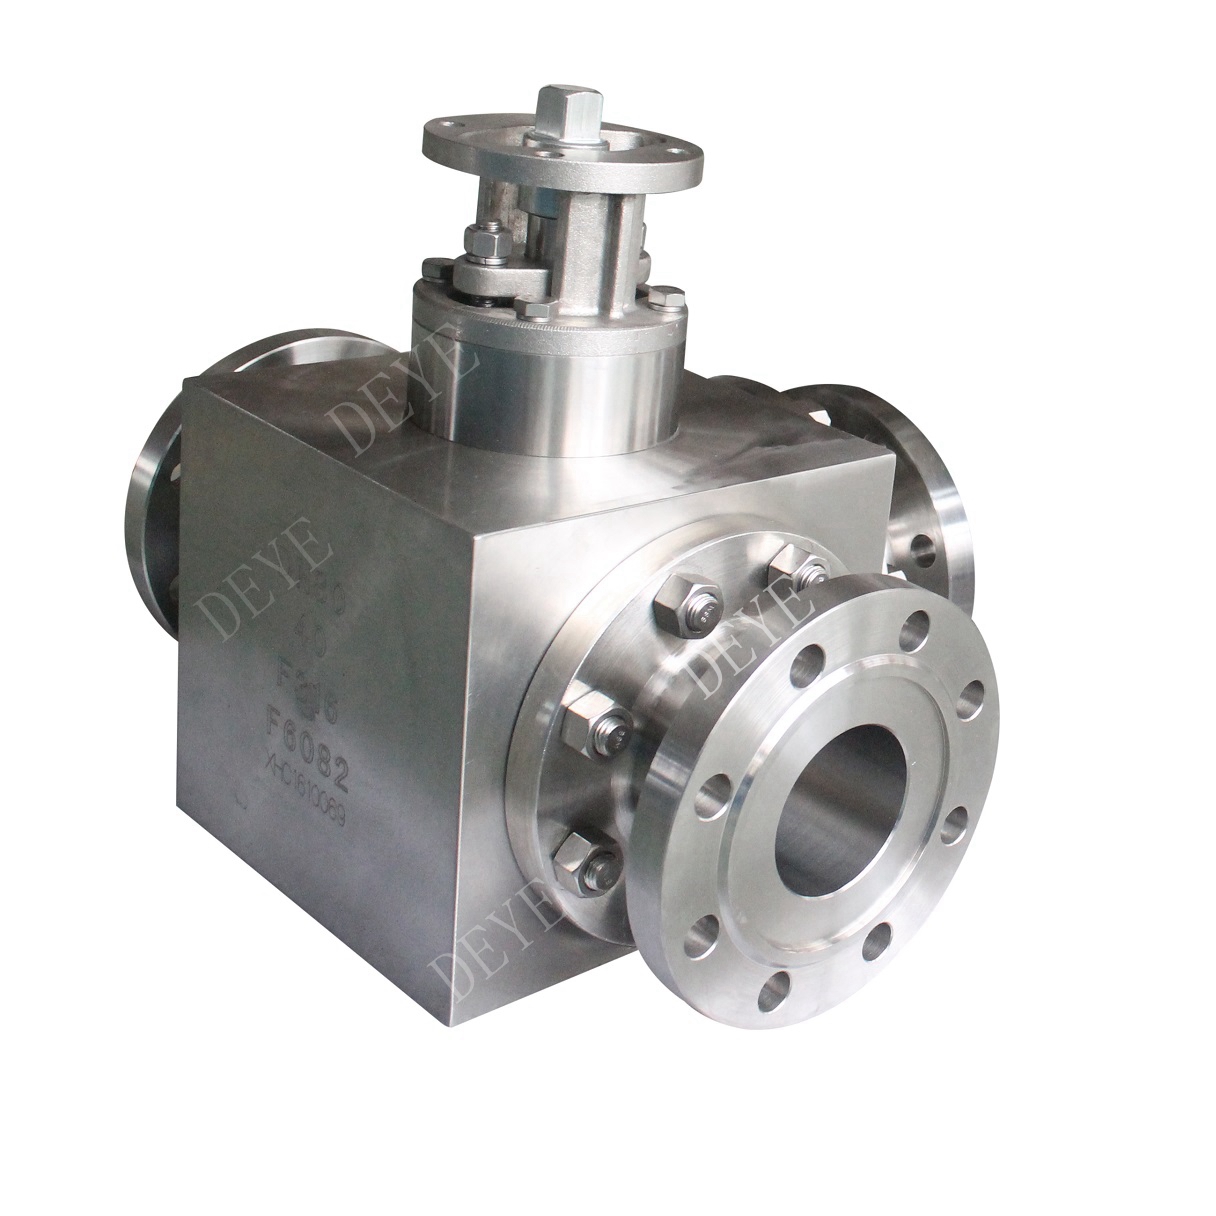 Hot Selling for F51 Check Valve -
  300LBS stainless steel 3-way ball valve with Flanged ends  BV-300-3WYF – Deye